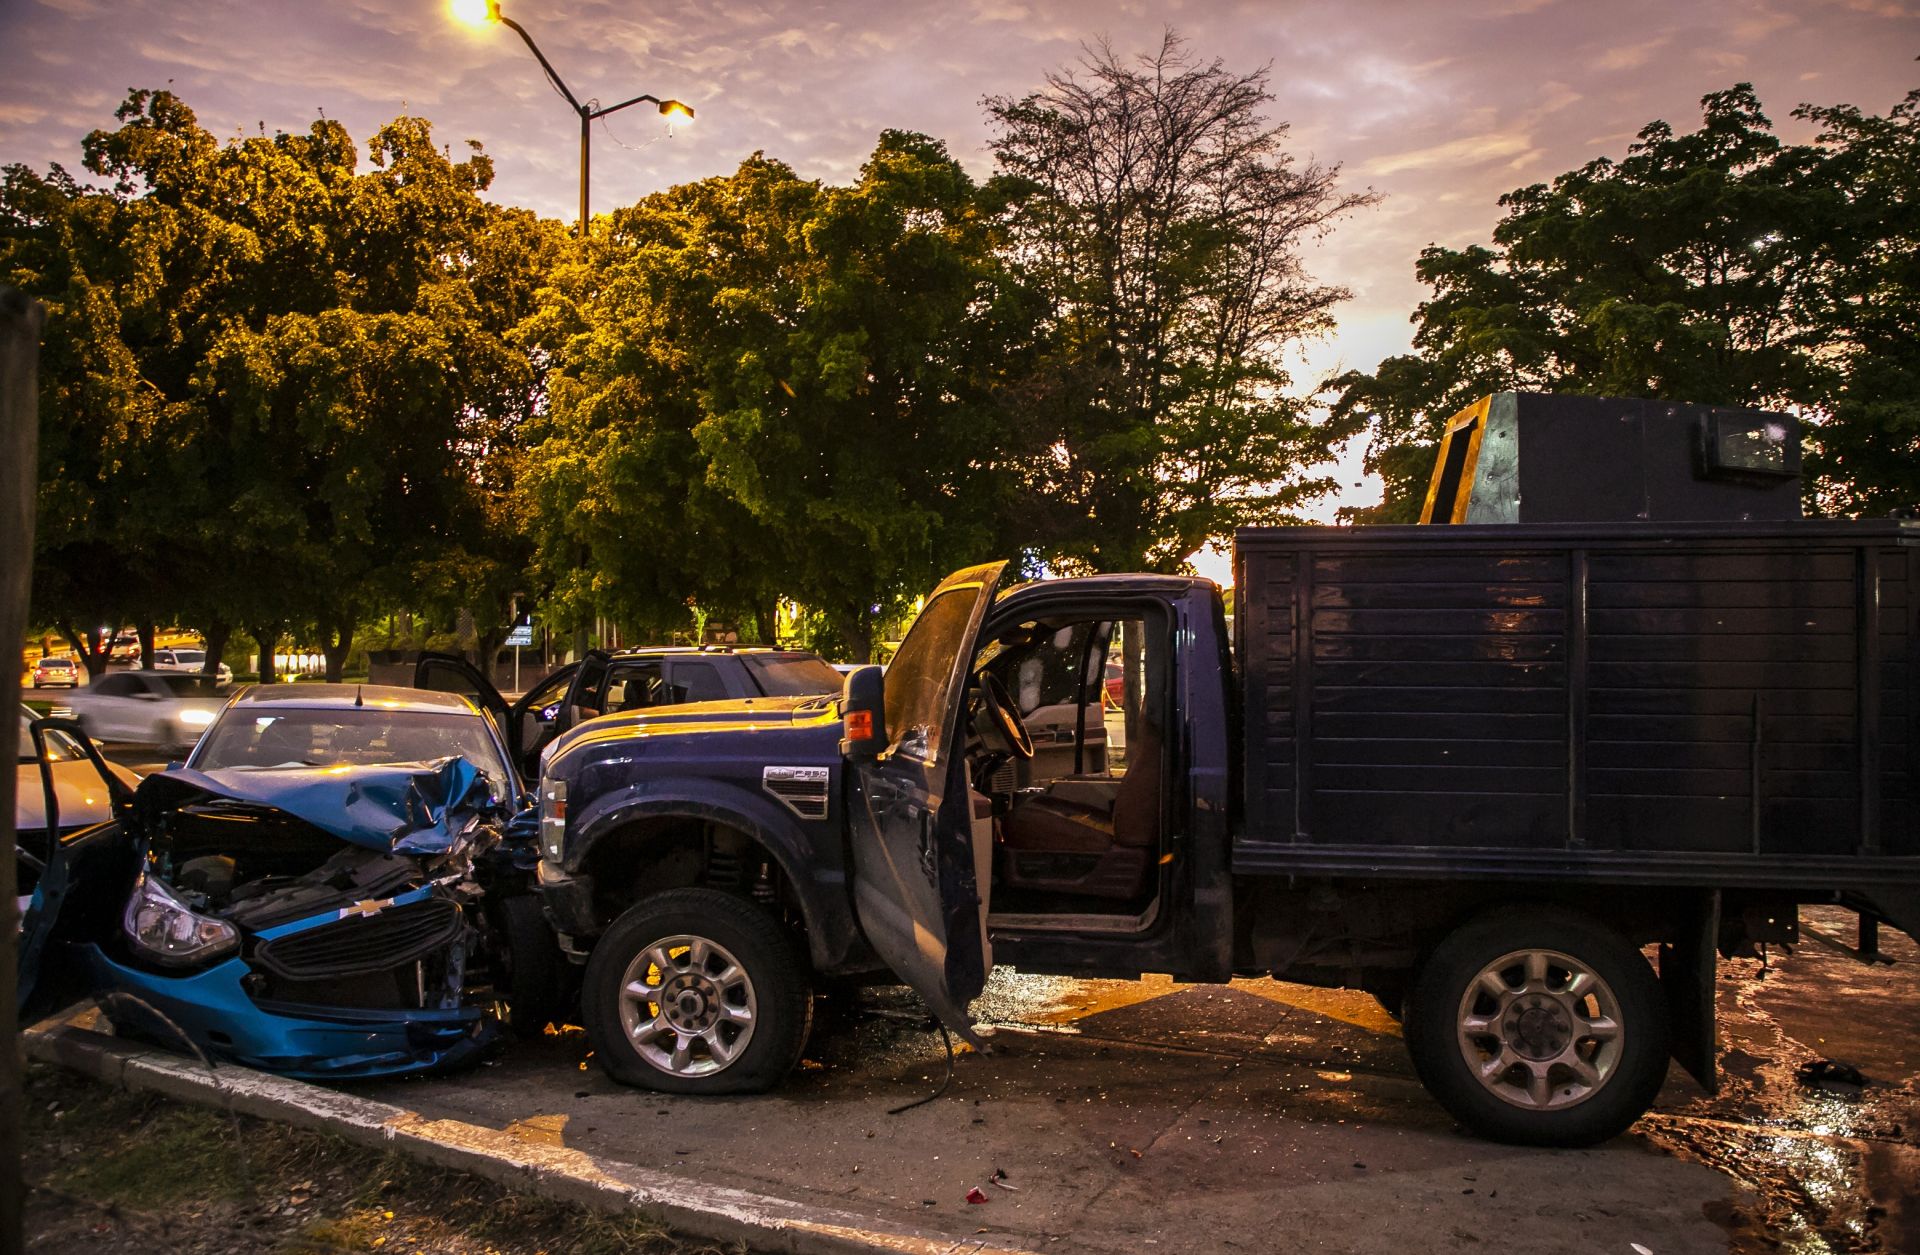 Bullet-ridden and wrecked vehicles in the Sinaloa state capital of Culiacan, Mexico, on Oct. 17, 2019.